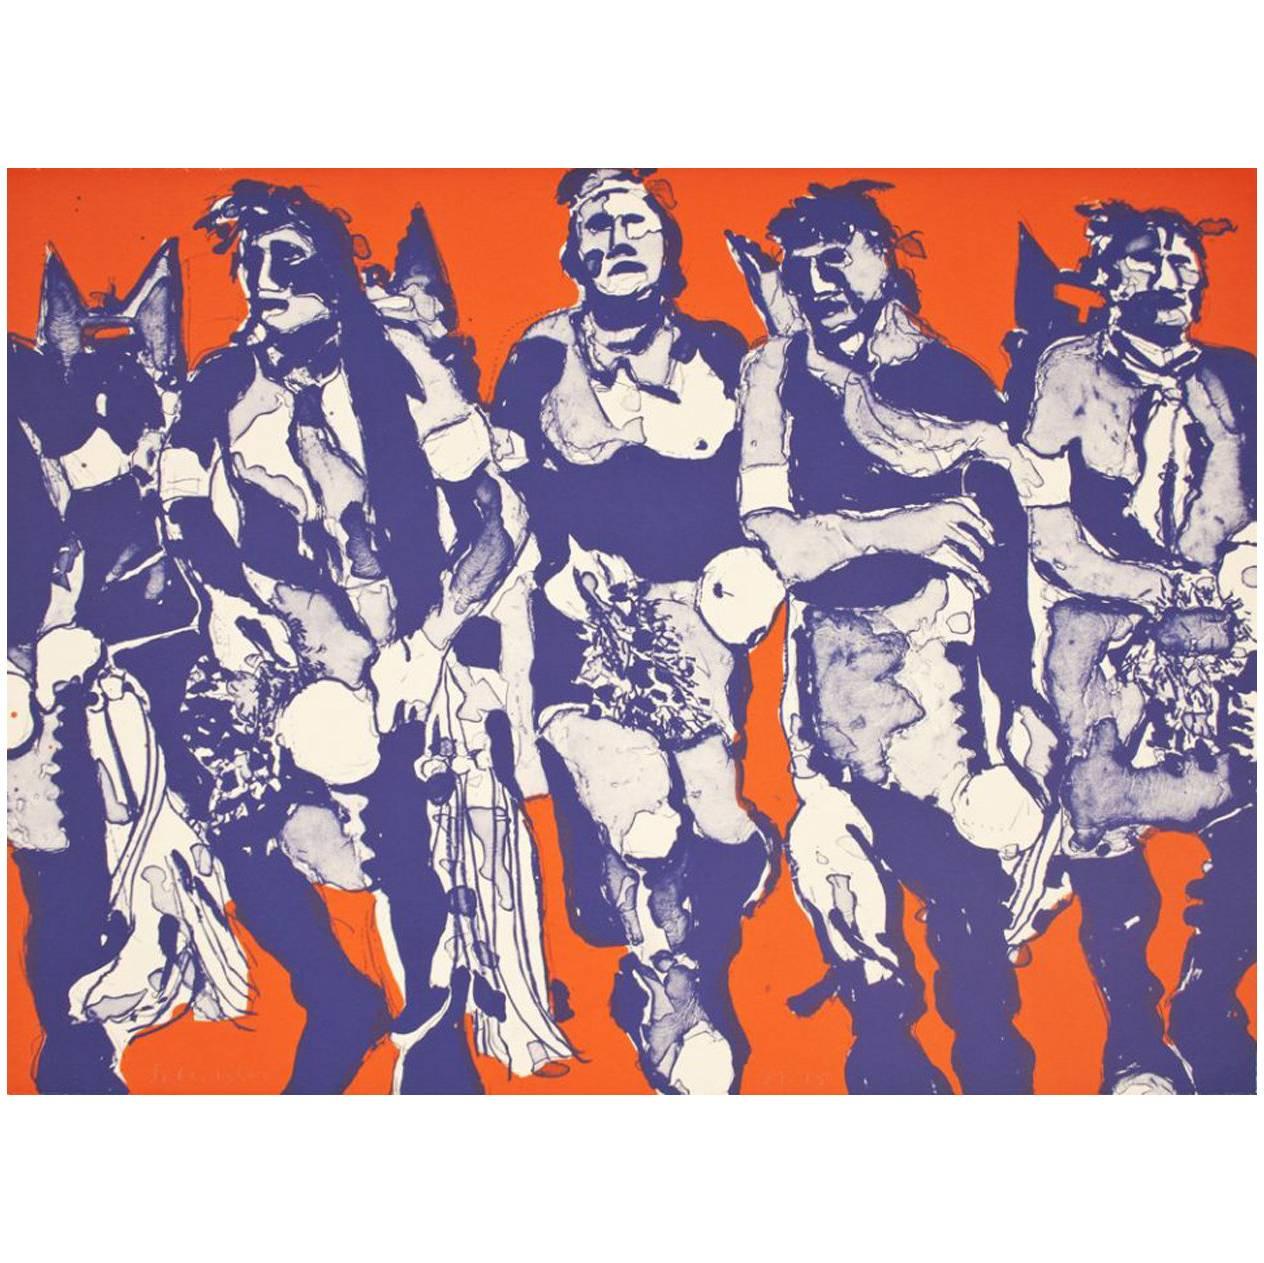 Hopi Dancers Lithograph, State 1, by Fritz Scholder Lithograph For Sale